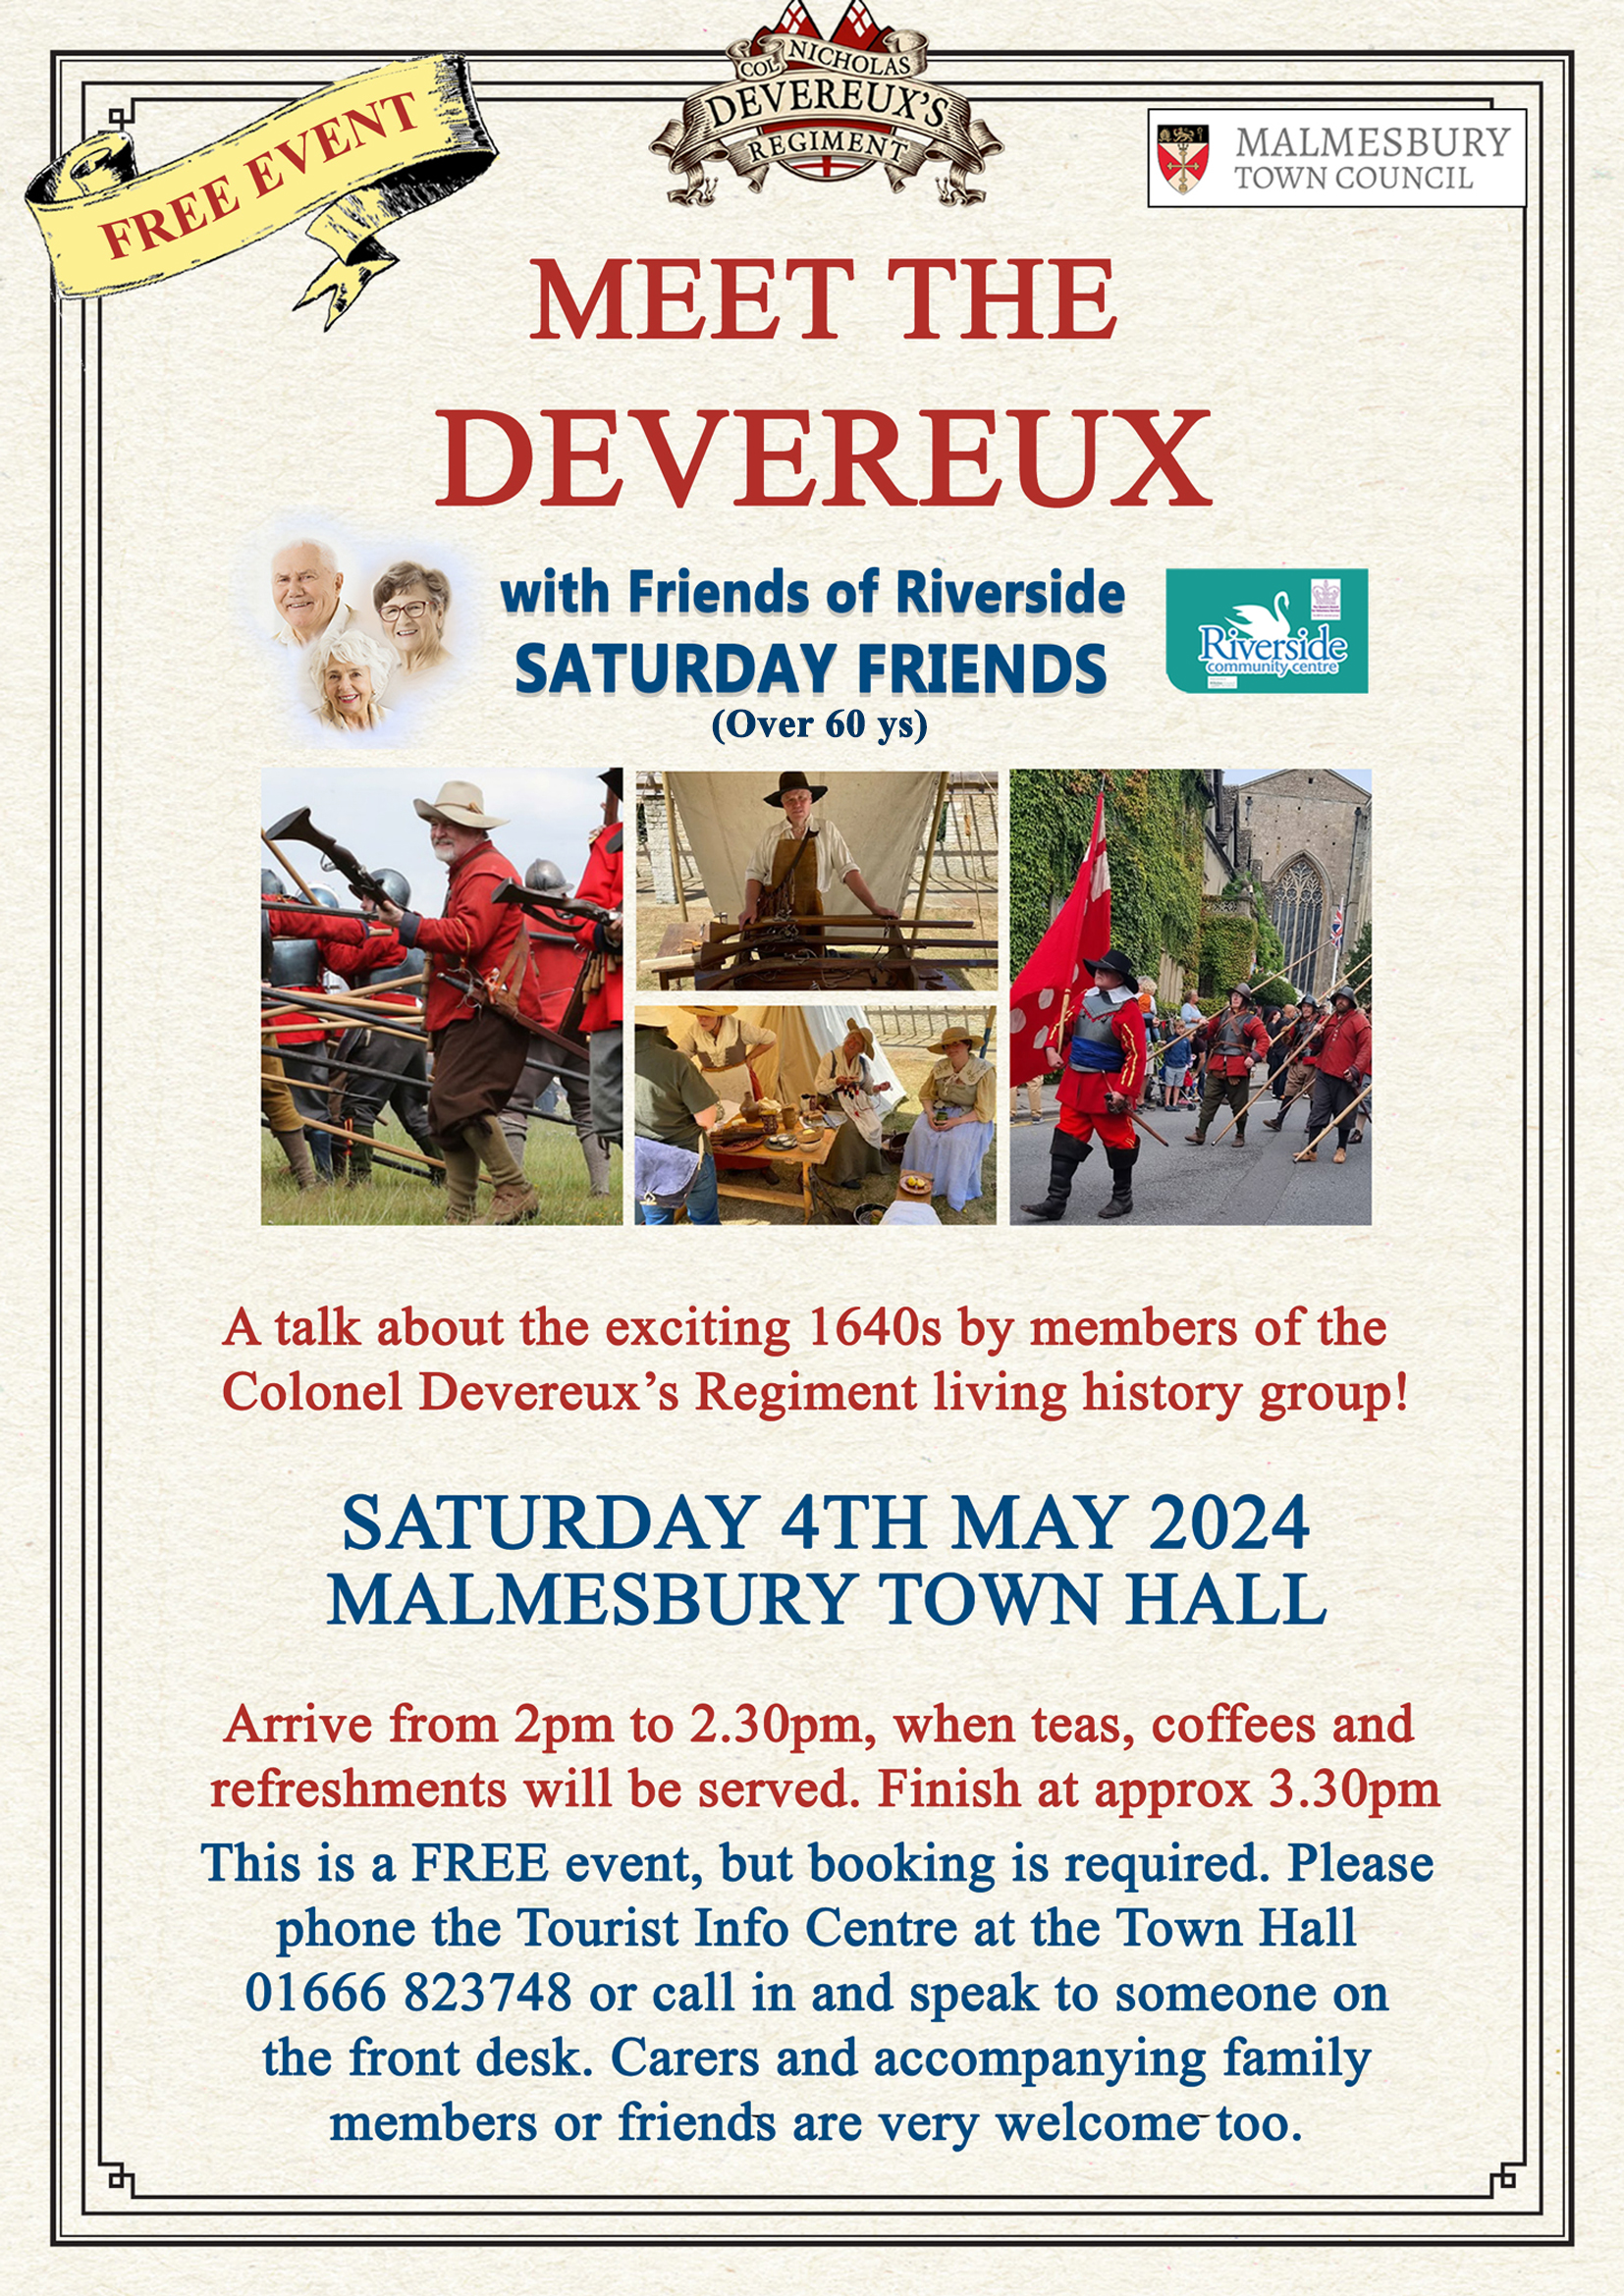 Saturday 4th May 2024 at 2.00pm - Malmesbury Town Hall - *Free* Devereux Event with Friends of Riverside 